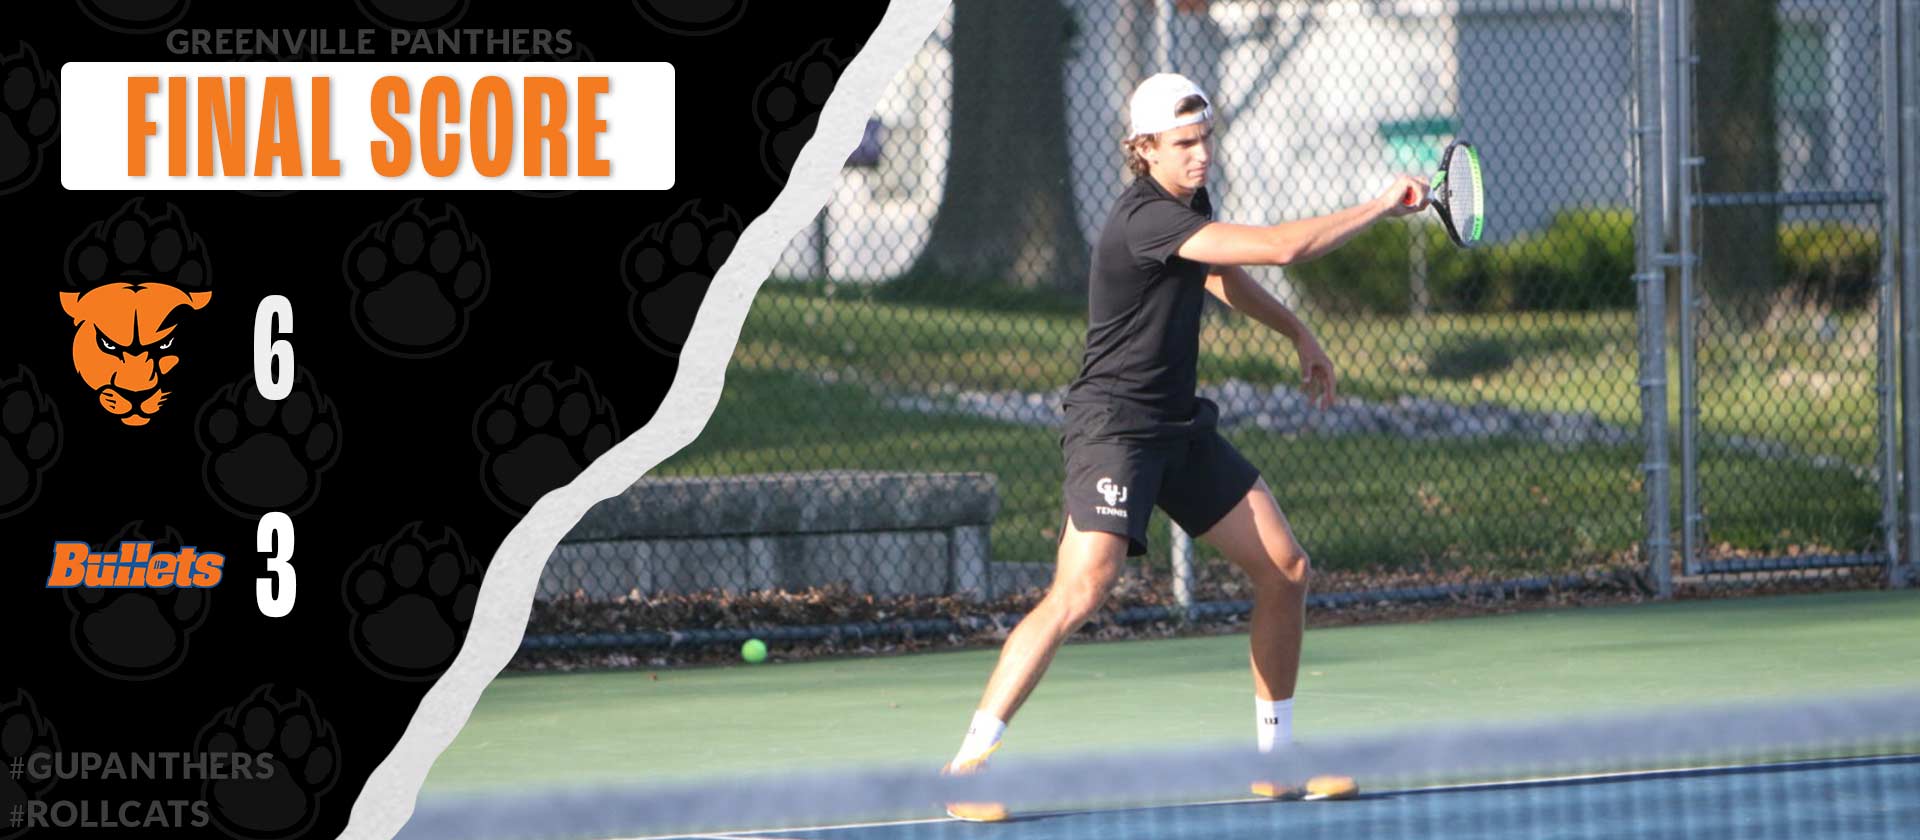 Men's tennis wraps up South Carolina swing with 6-3 win over Gettysburg